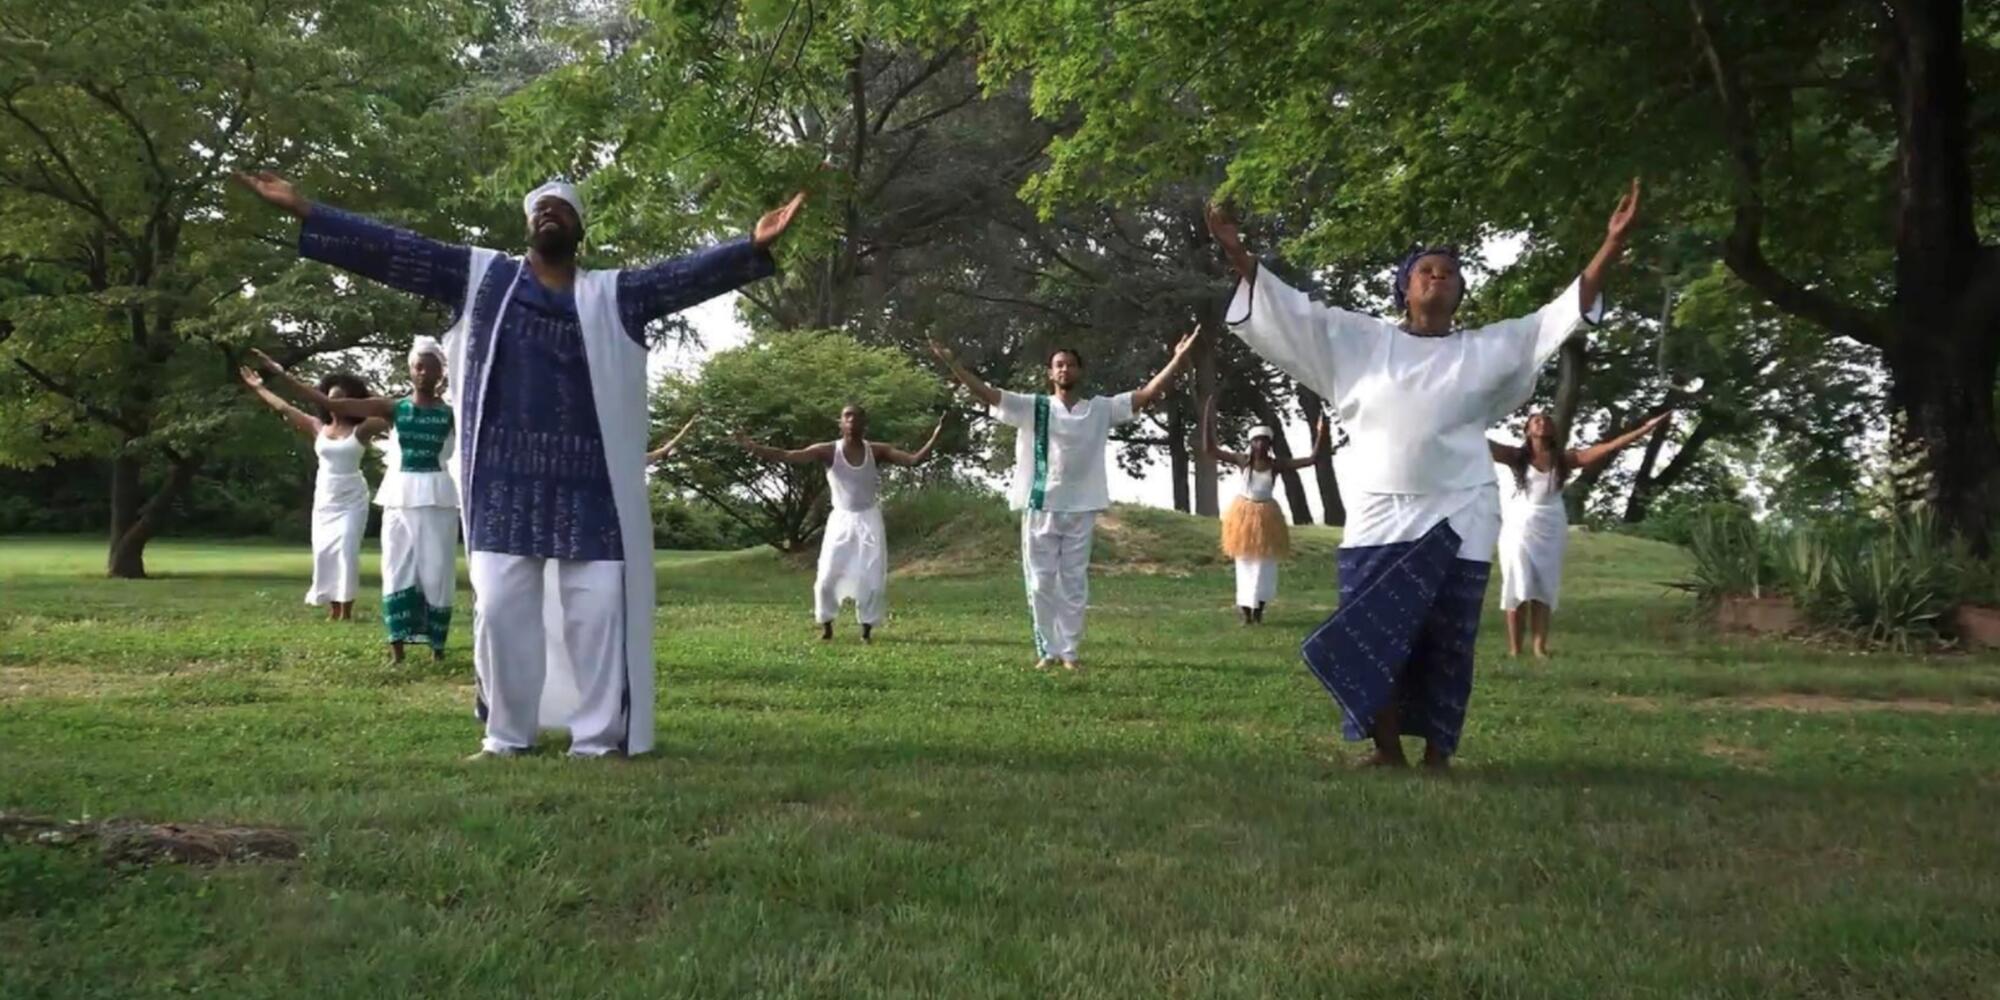 Dr. Nance with his mentor Dr. Kariamu Welsh and others dancing in a grassy meadow